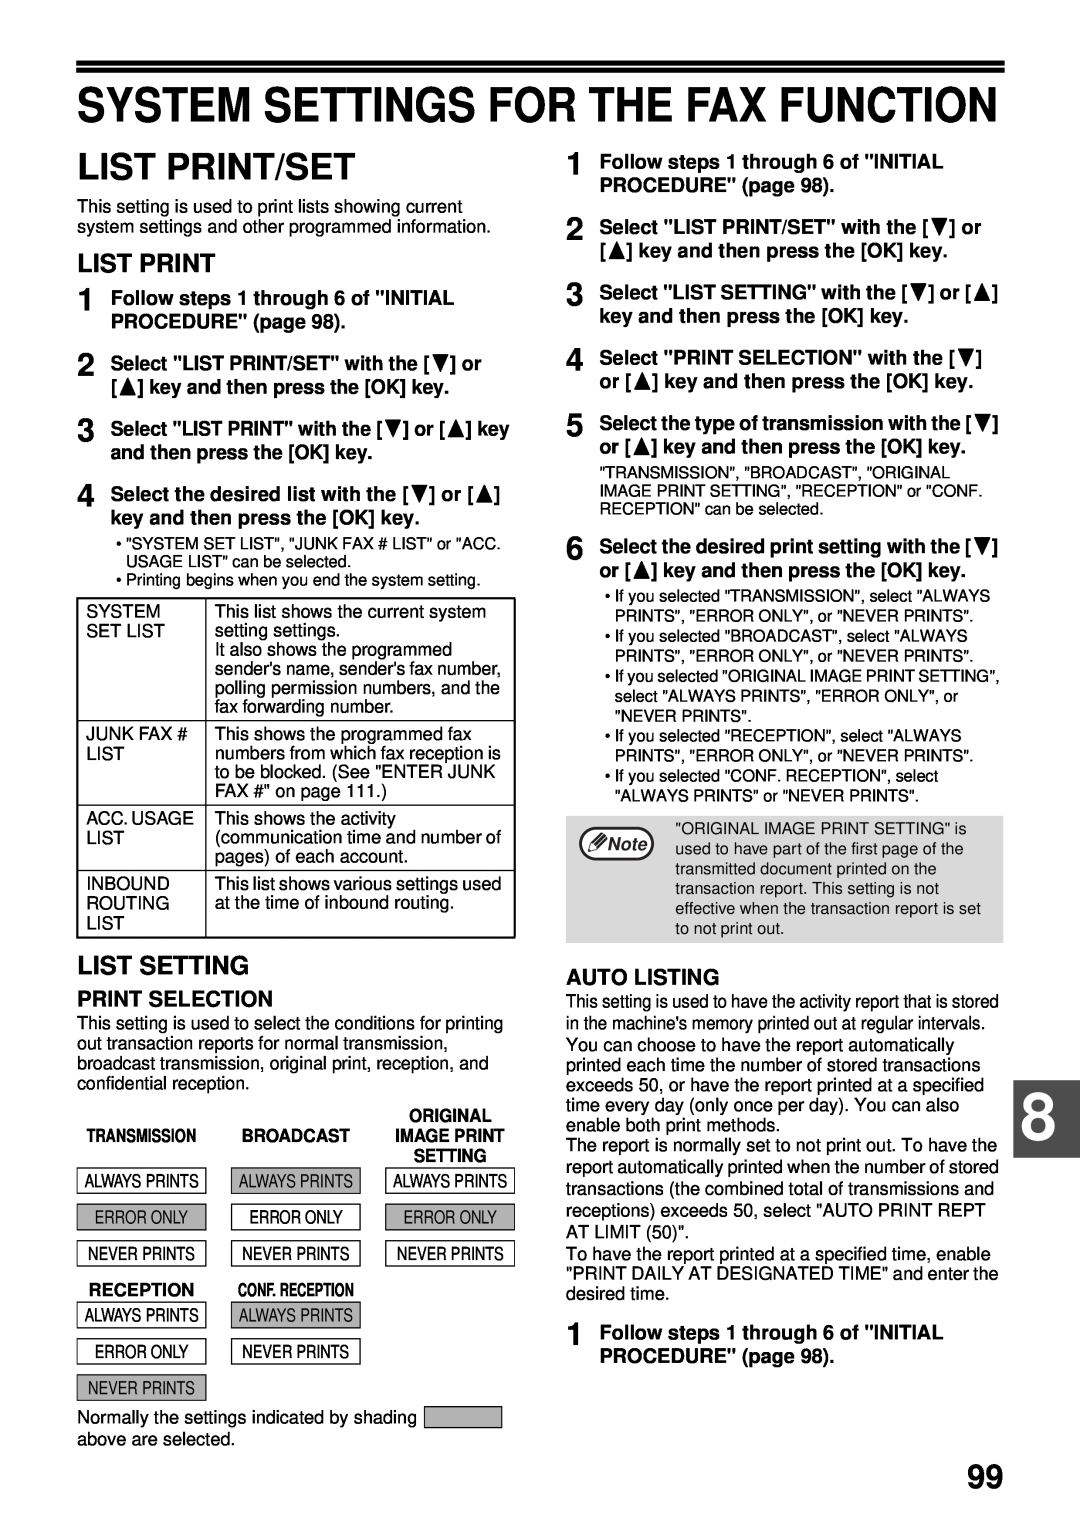 Sharp MX-FX13 appendix System Settings For The Fax Function, List Print/Set, List Setting, Print Selection, Auto Listing 